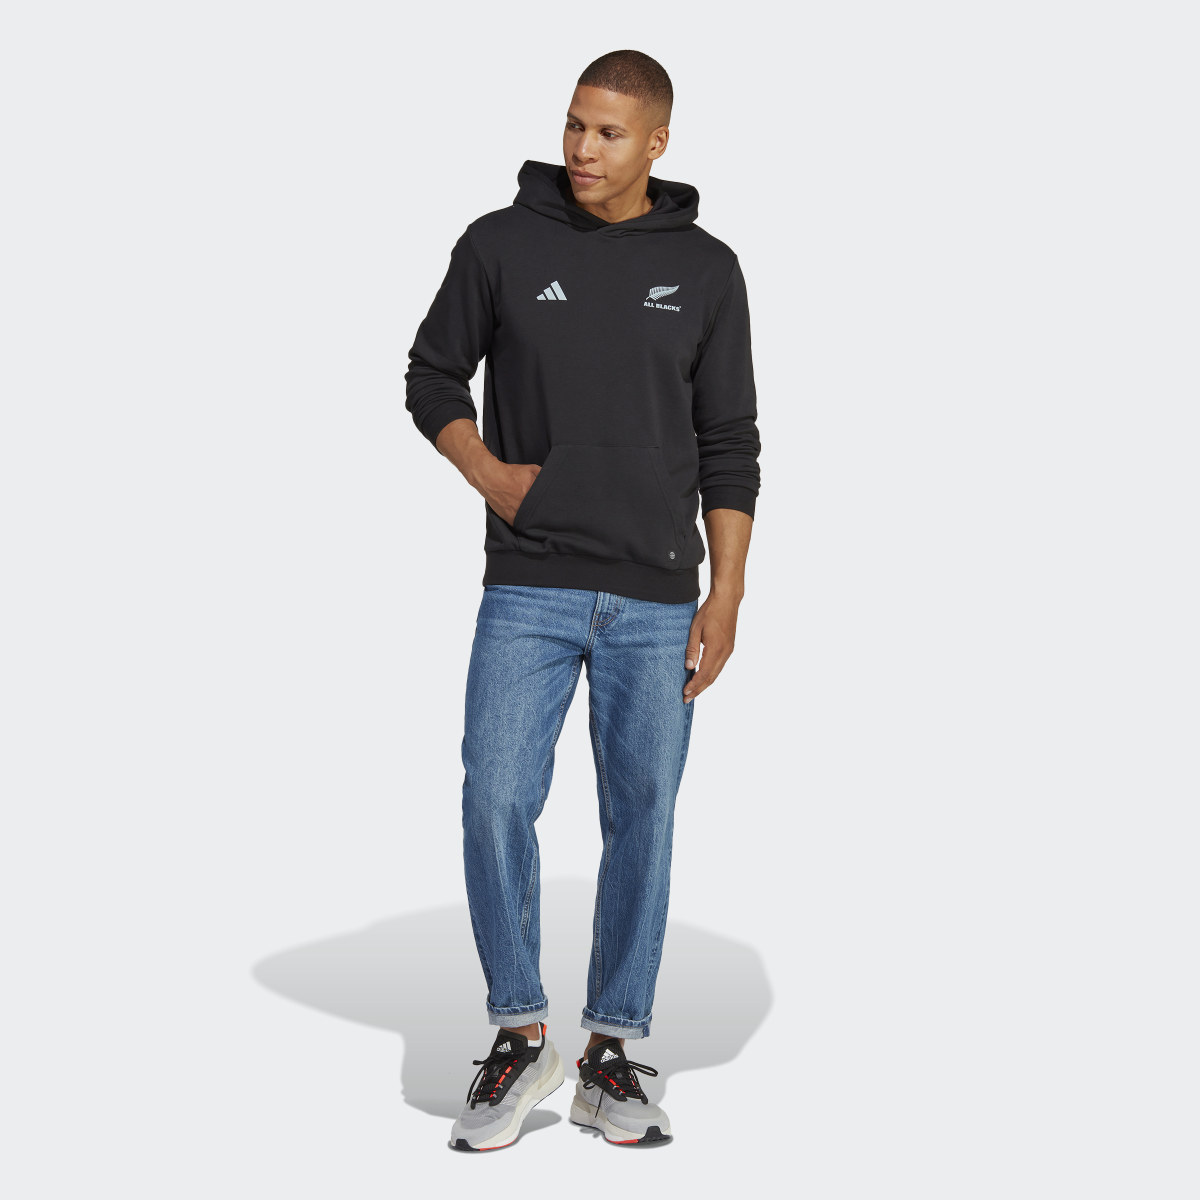 Adidas All Blacks Rugby Supporters Hoodie. 4